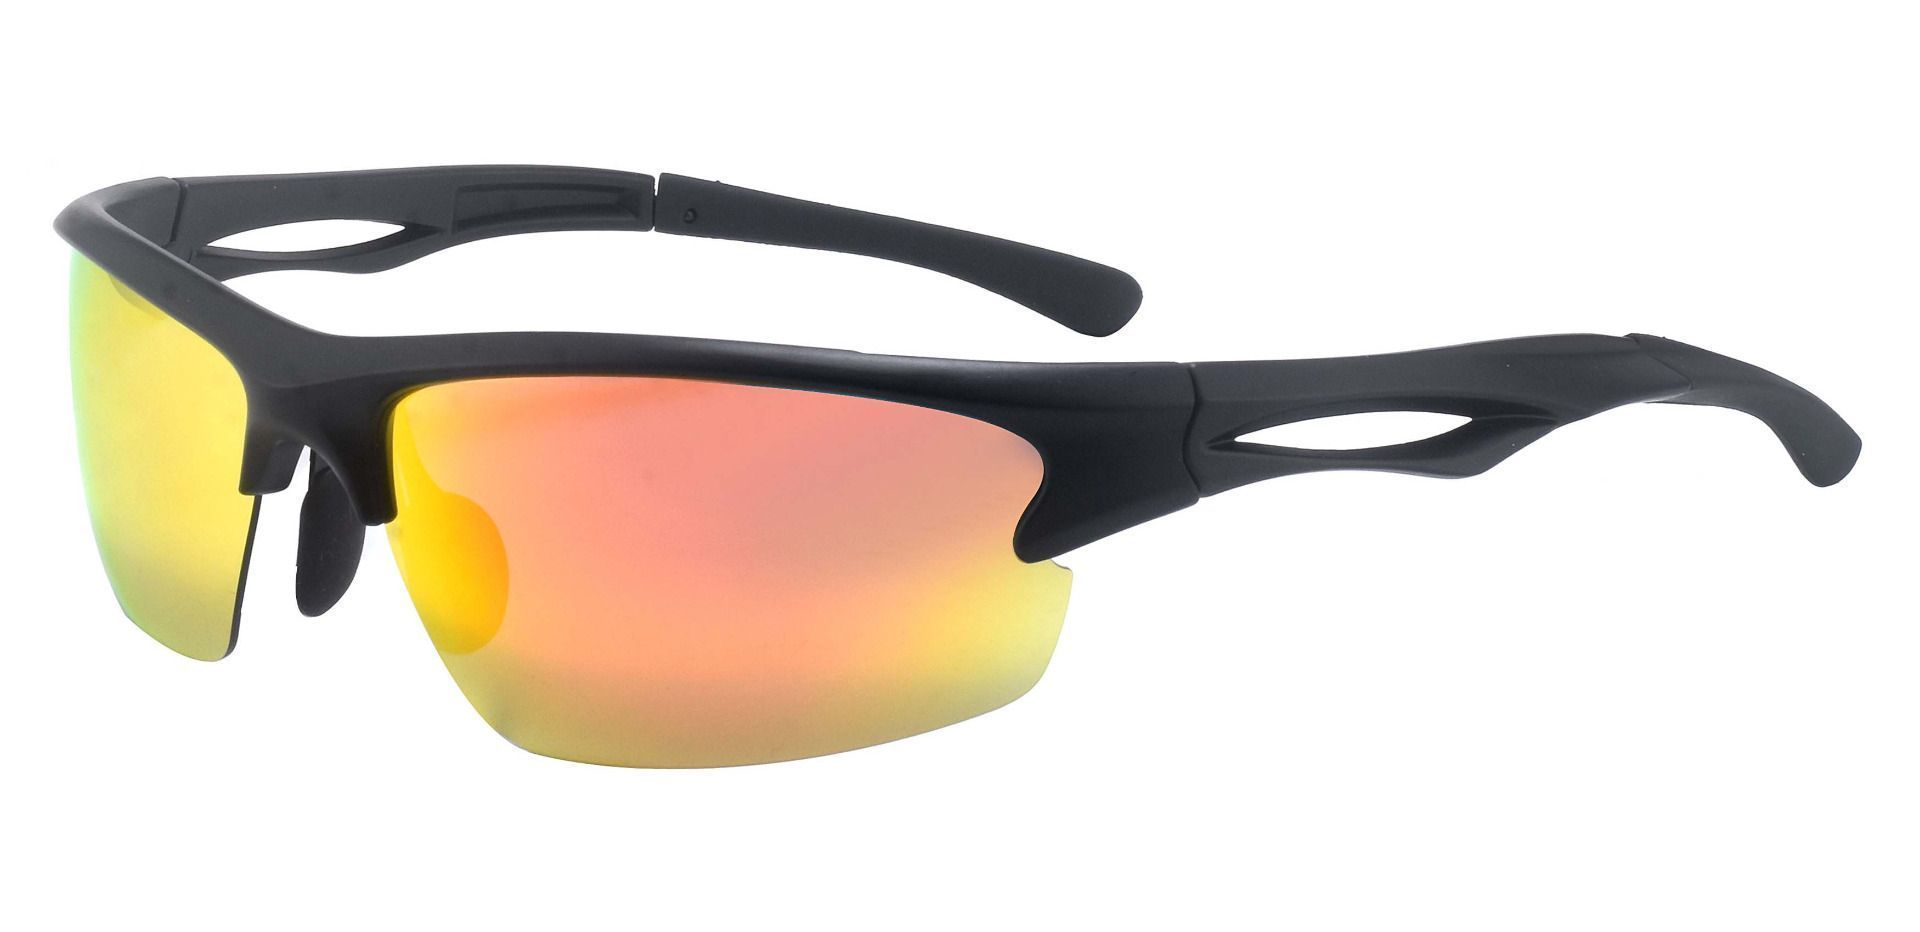 League Sports Glasses Non-Rx Sunglasses - Black Frame With Mirrored Lenses